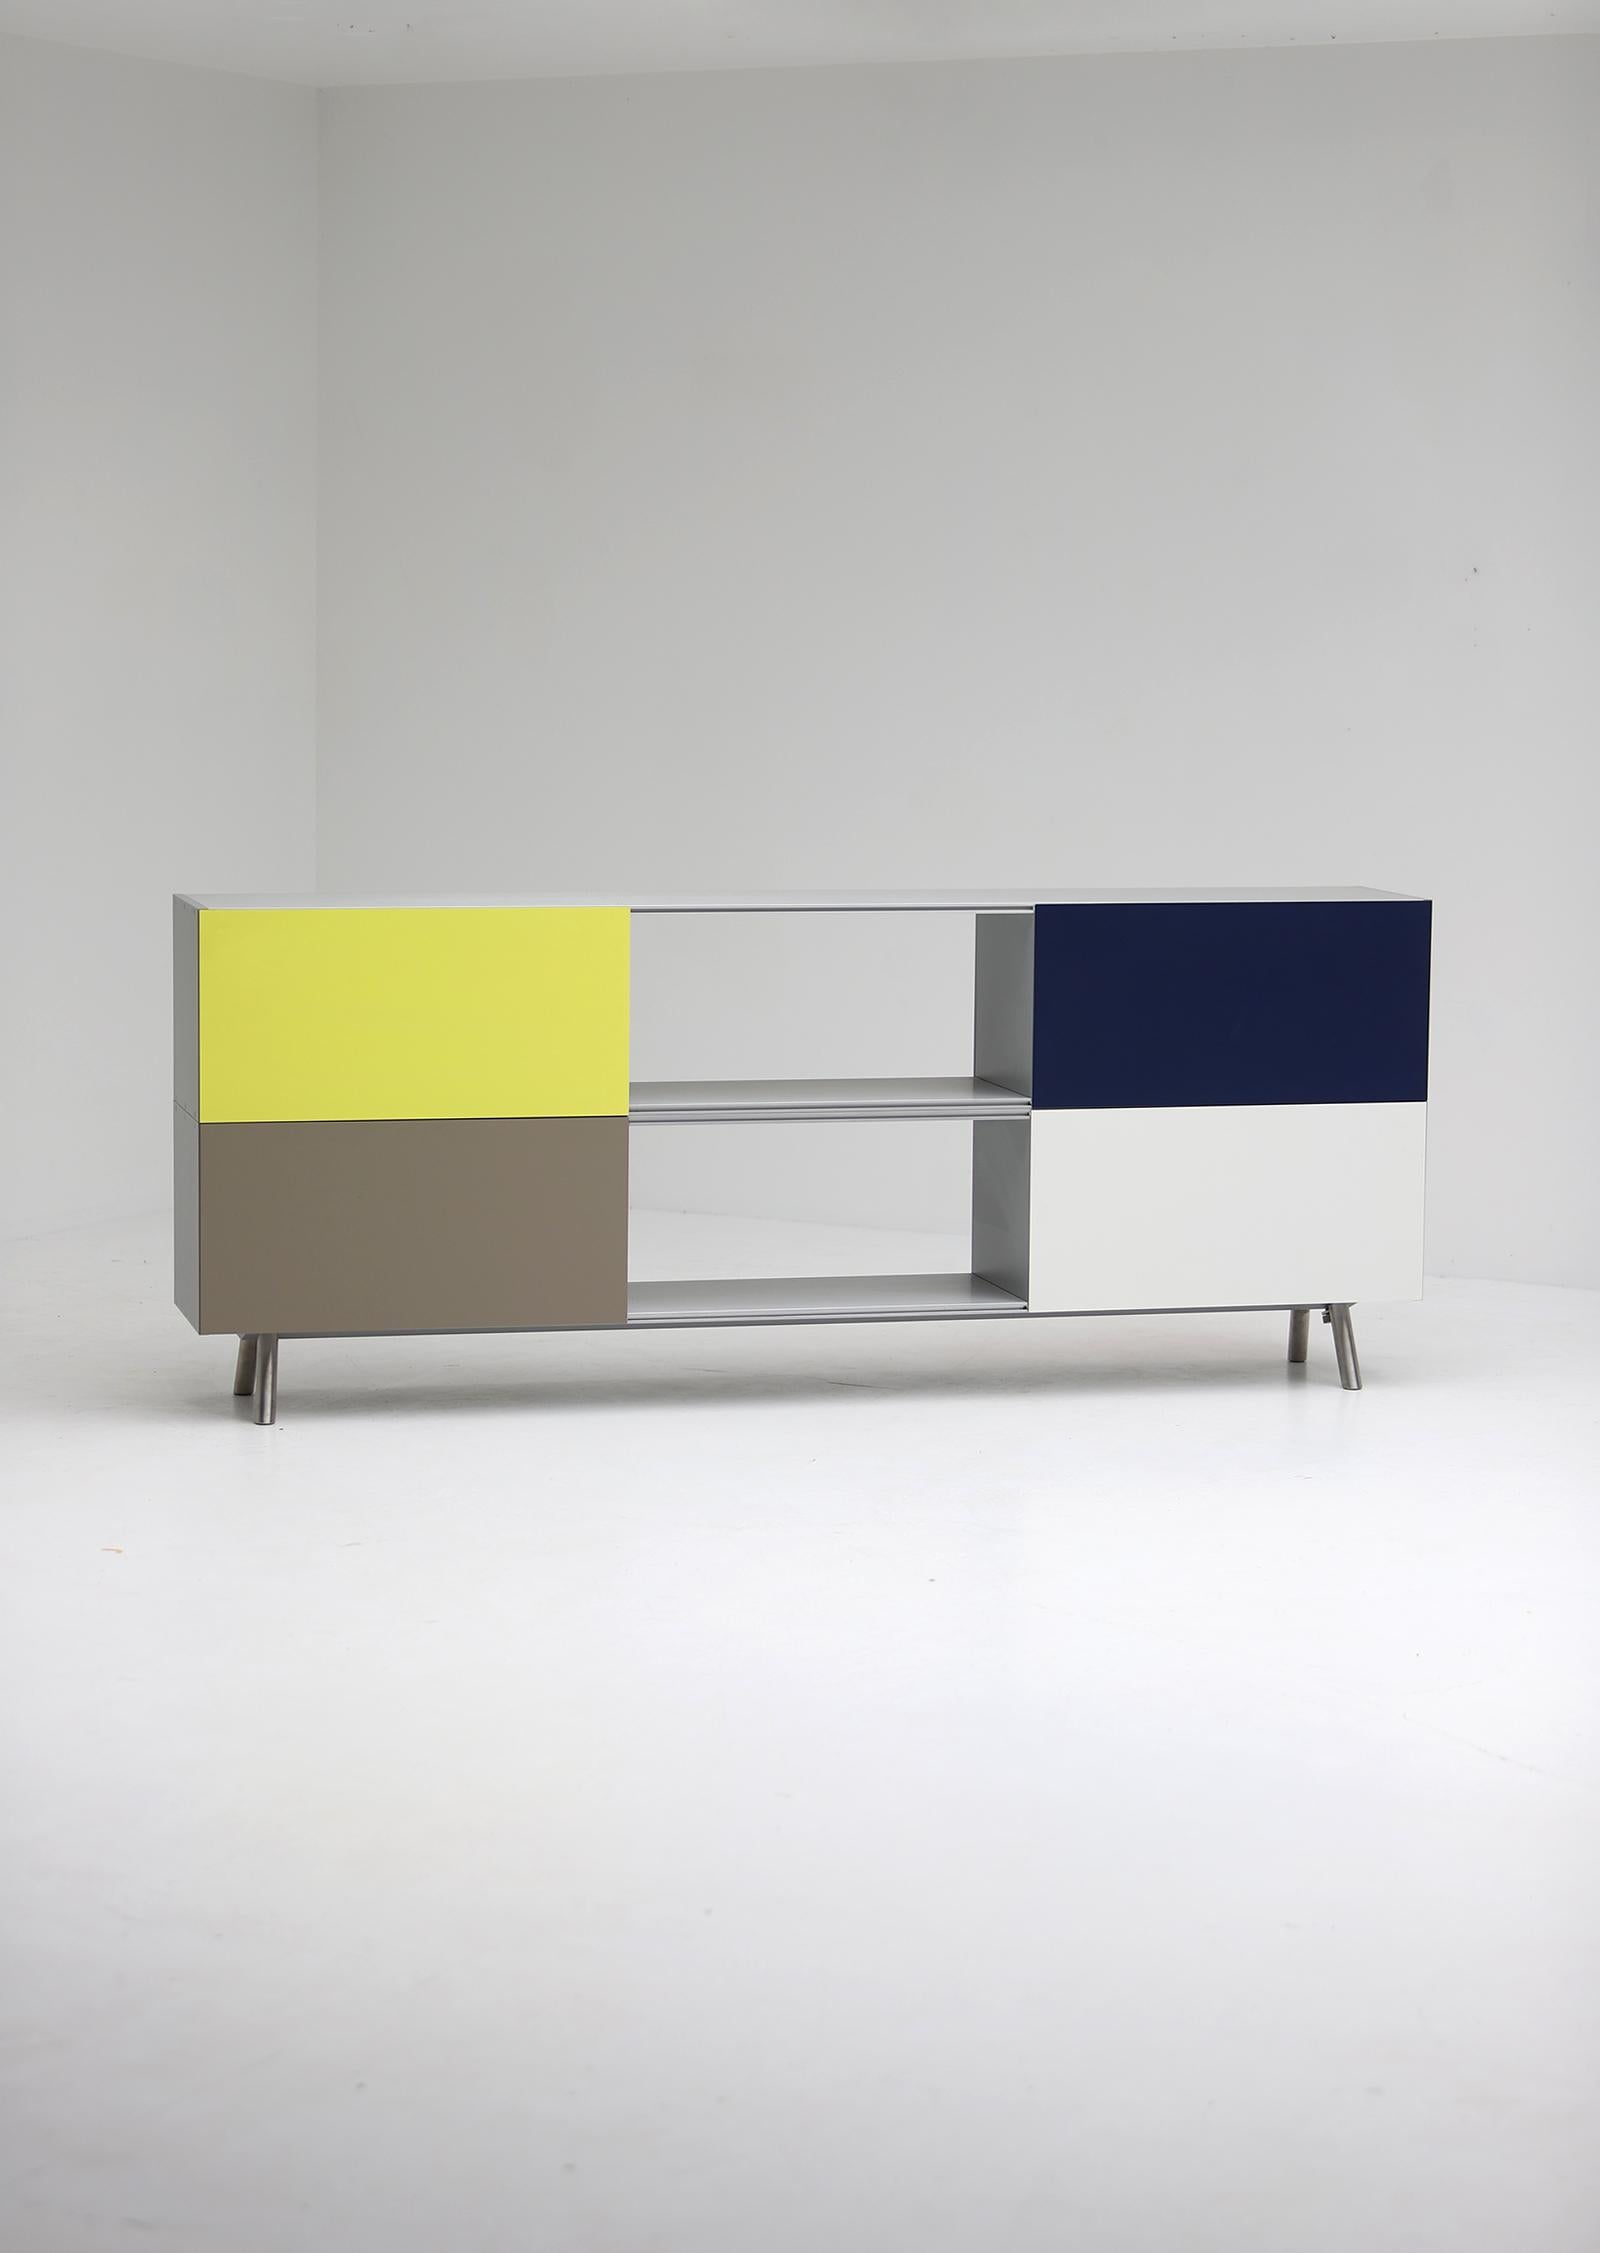 Decorative sideboard named ’ Kast’ by the hand of Belgian interior architect and furniture designer Maarten Van Severen. It was produced by Vitra in 2005 and unfortunately one of the last designs Van Severen ever designed. Van Severen came from an